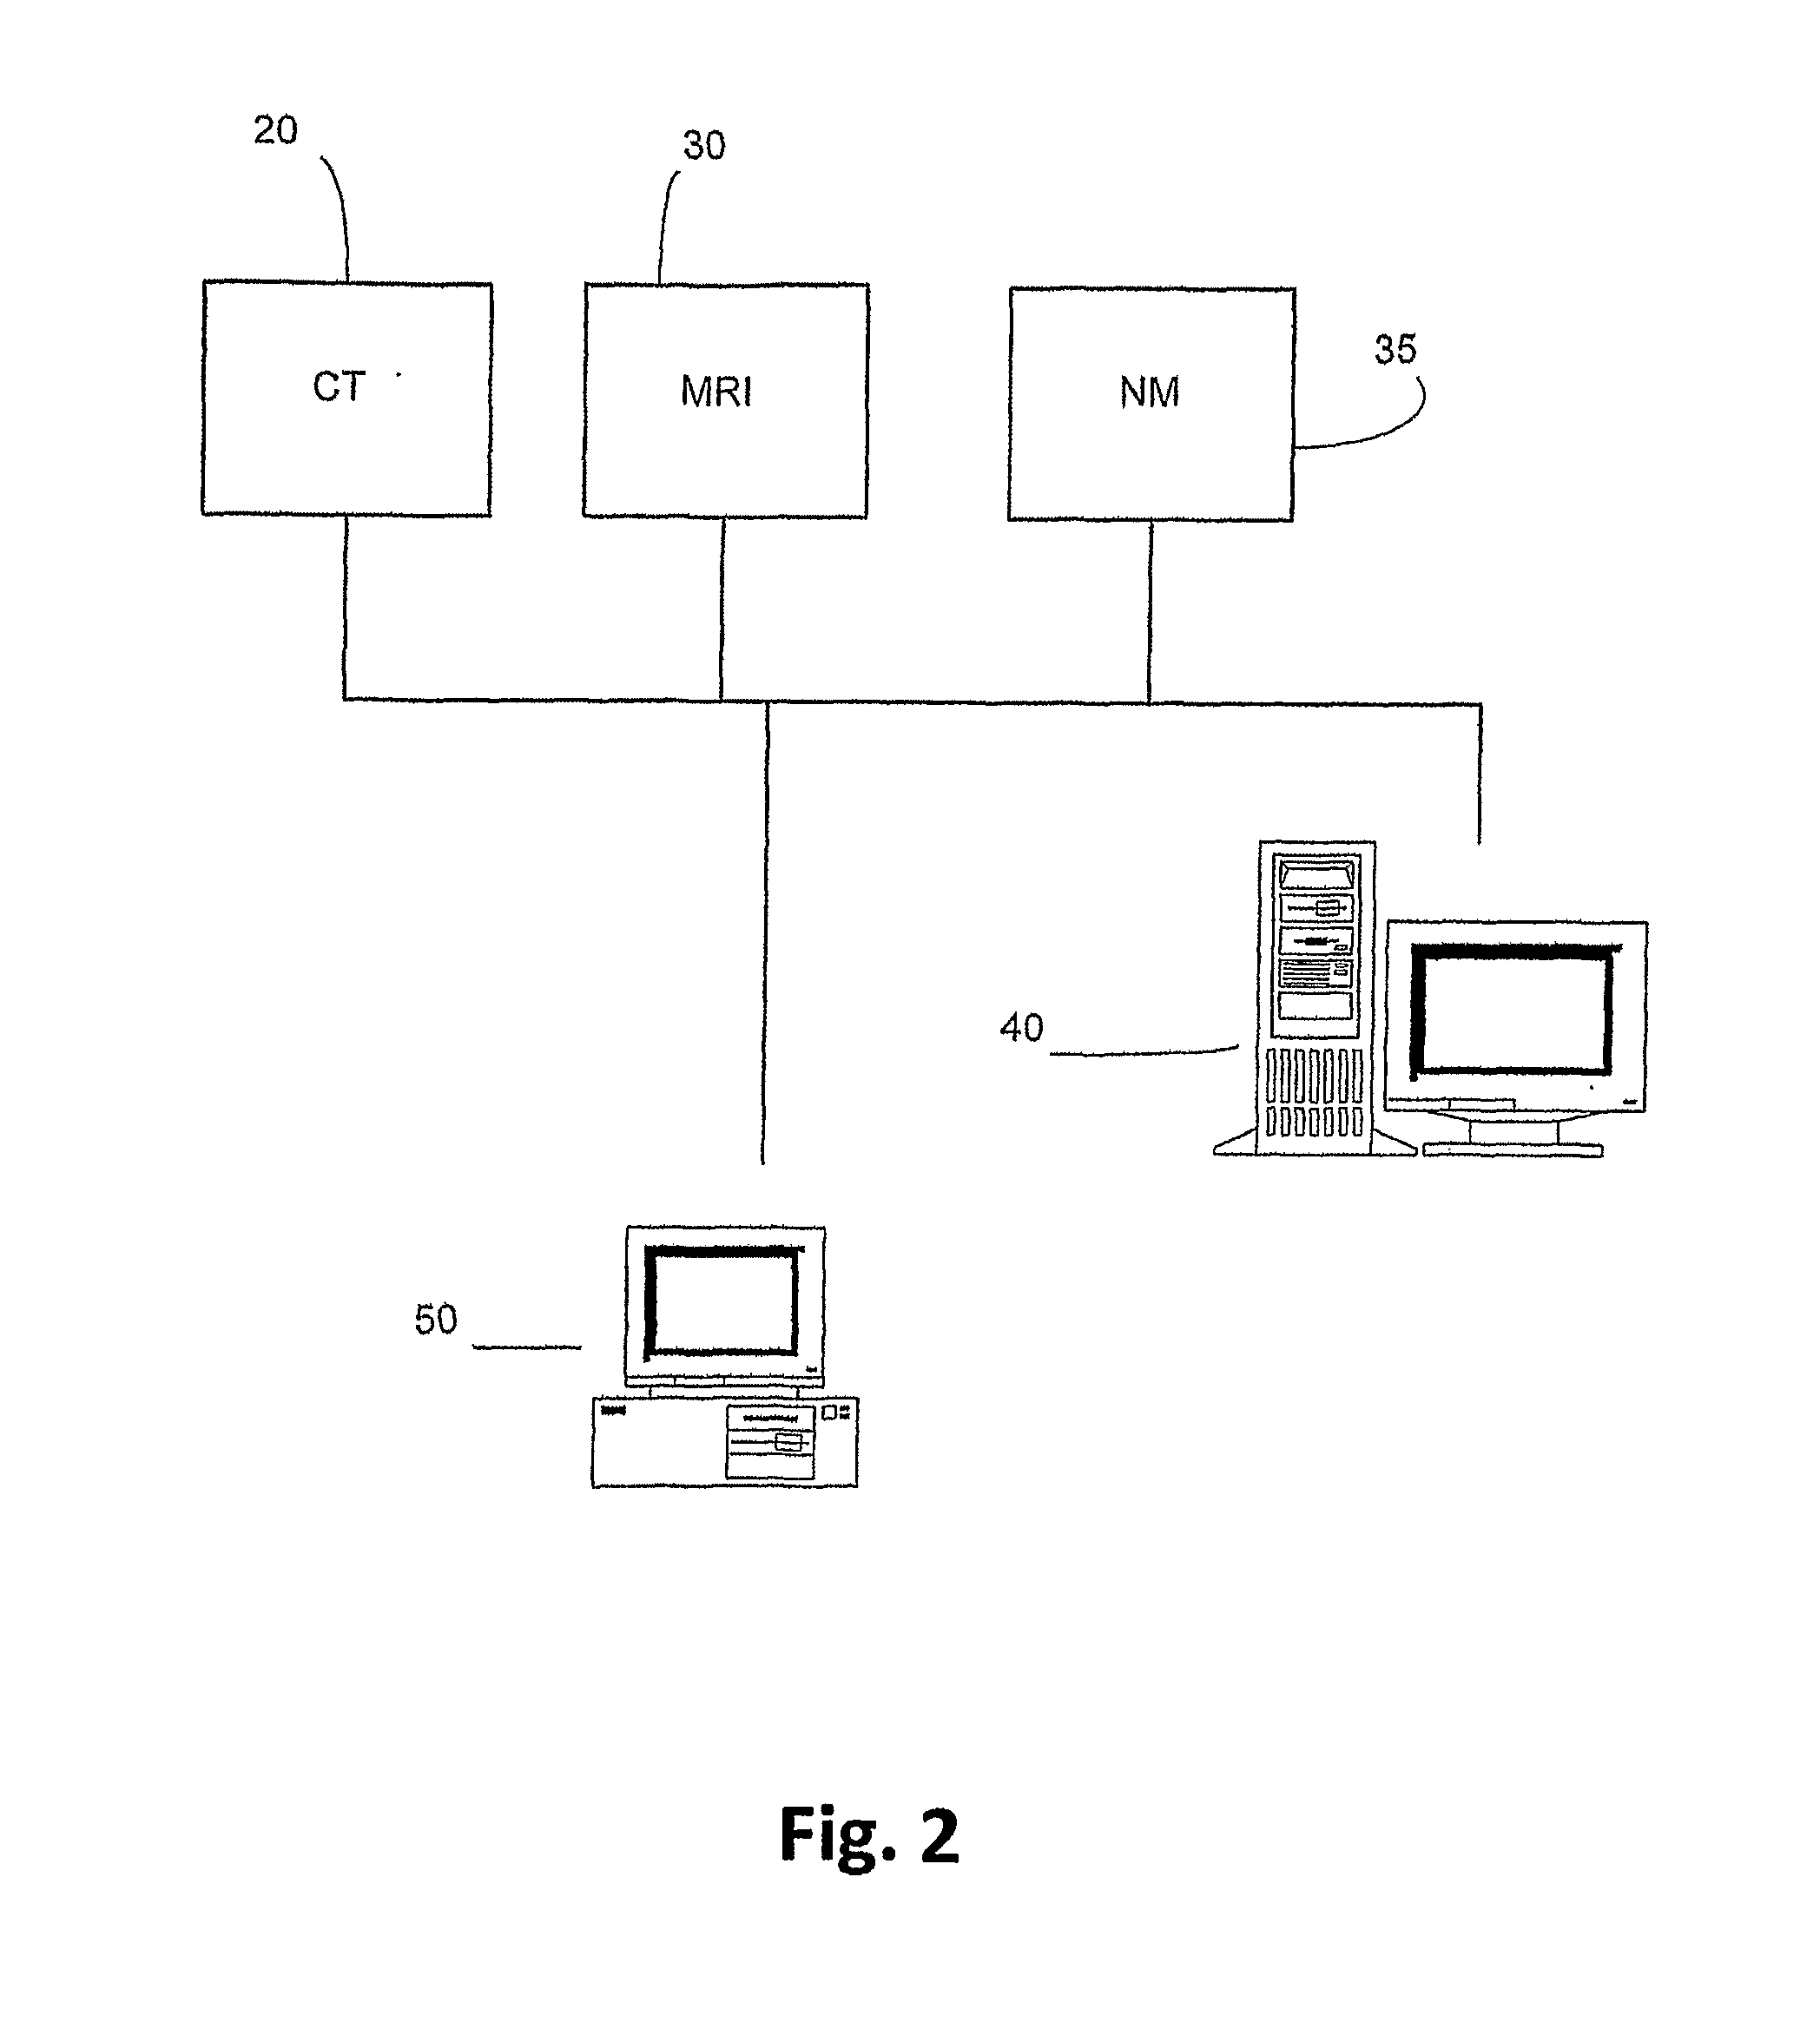 Method and system for mapping tissue status of acute stroke